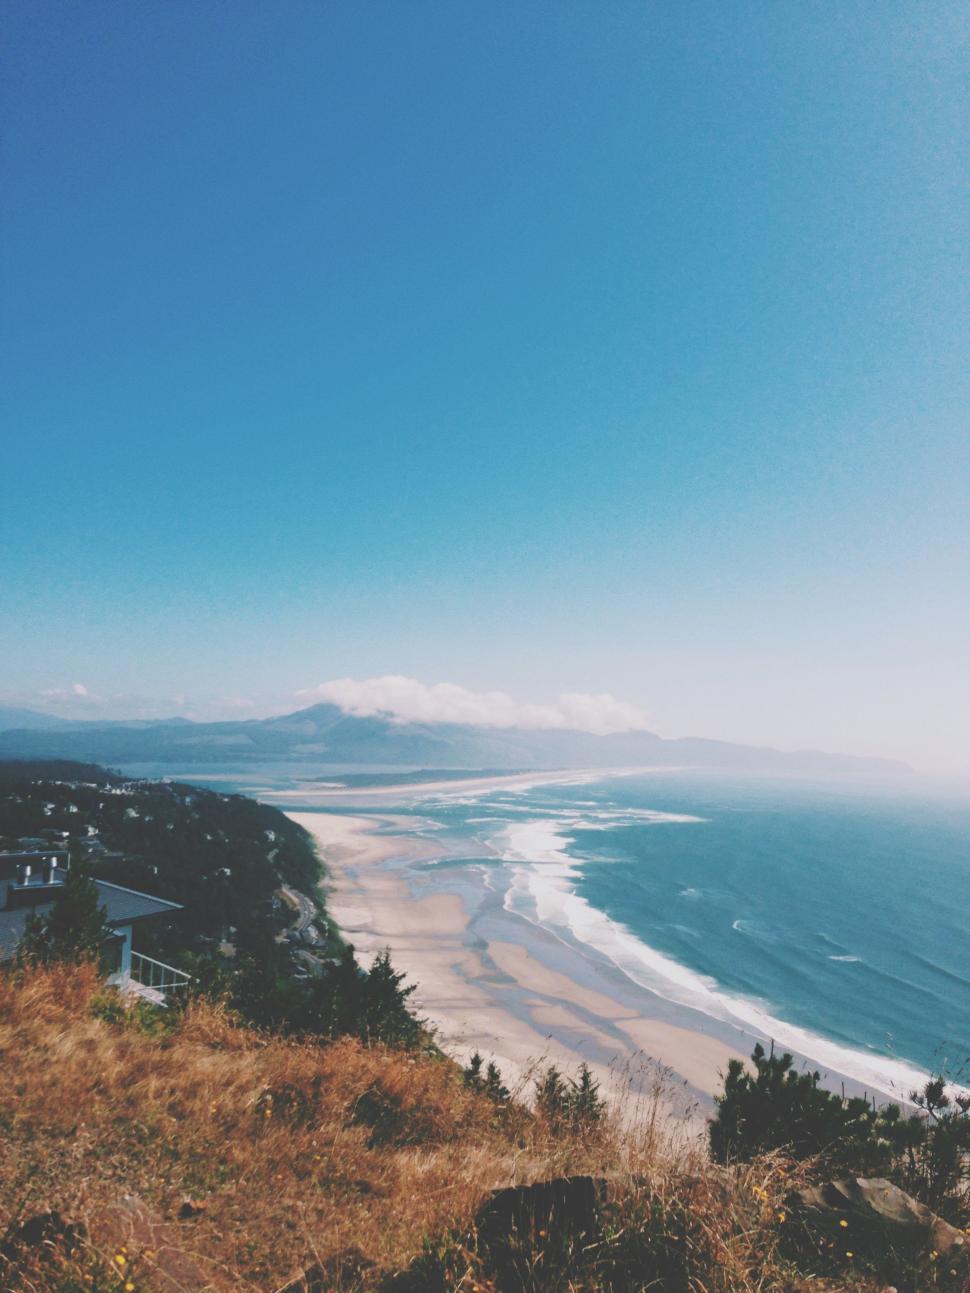 Free Image of Overlooking a Beach From a Hilltop 